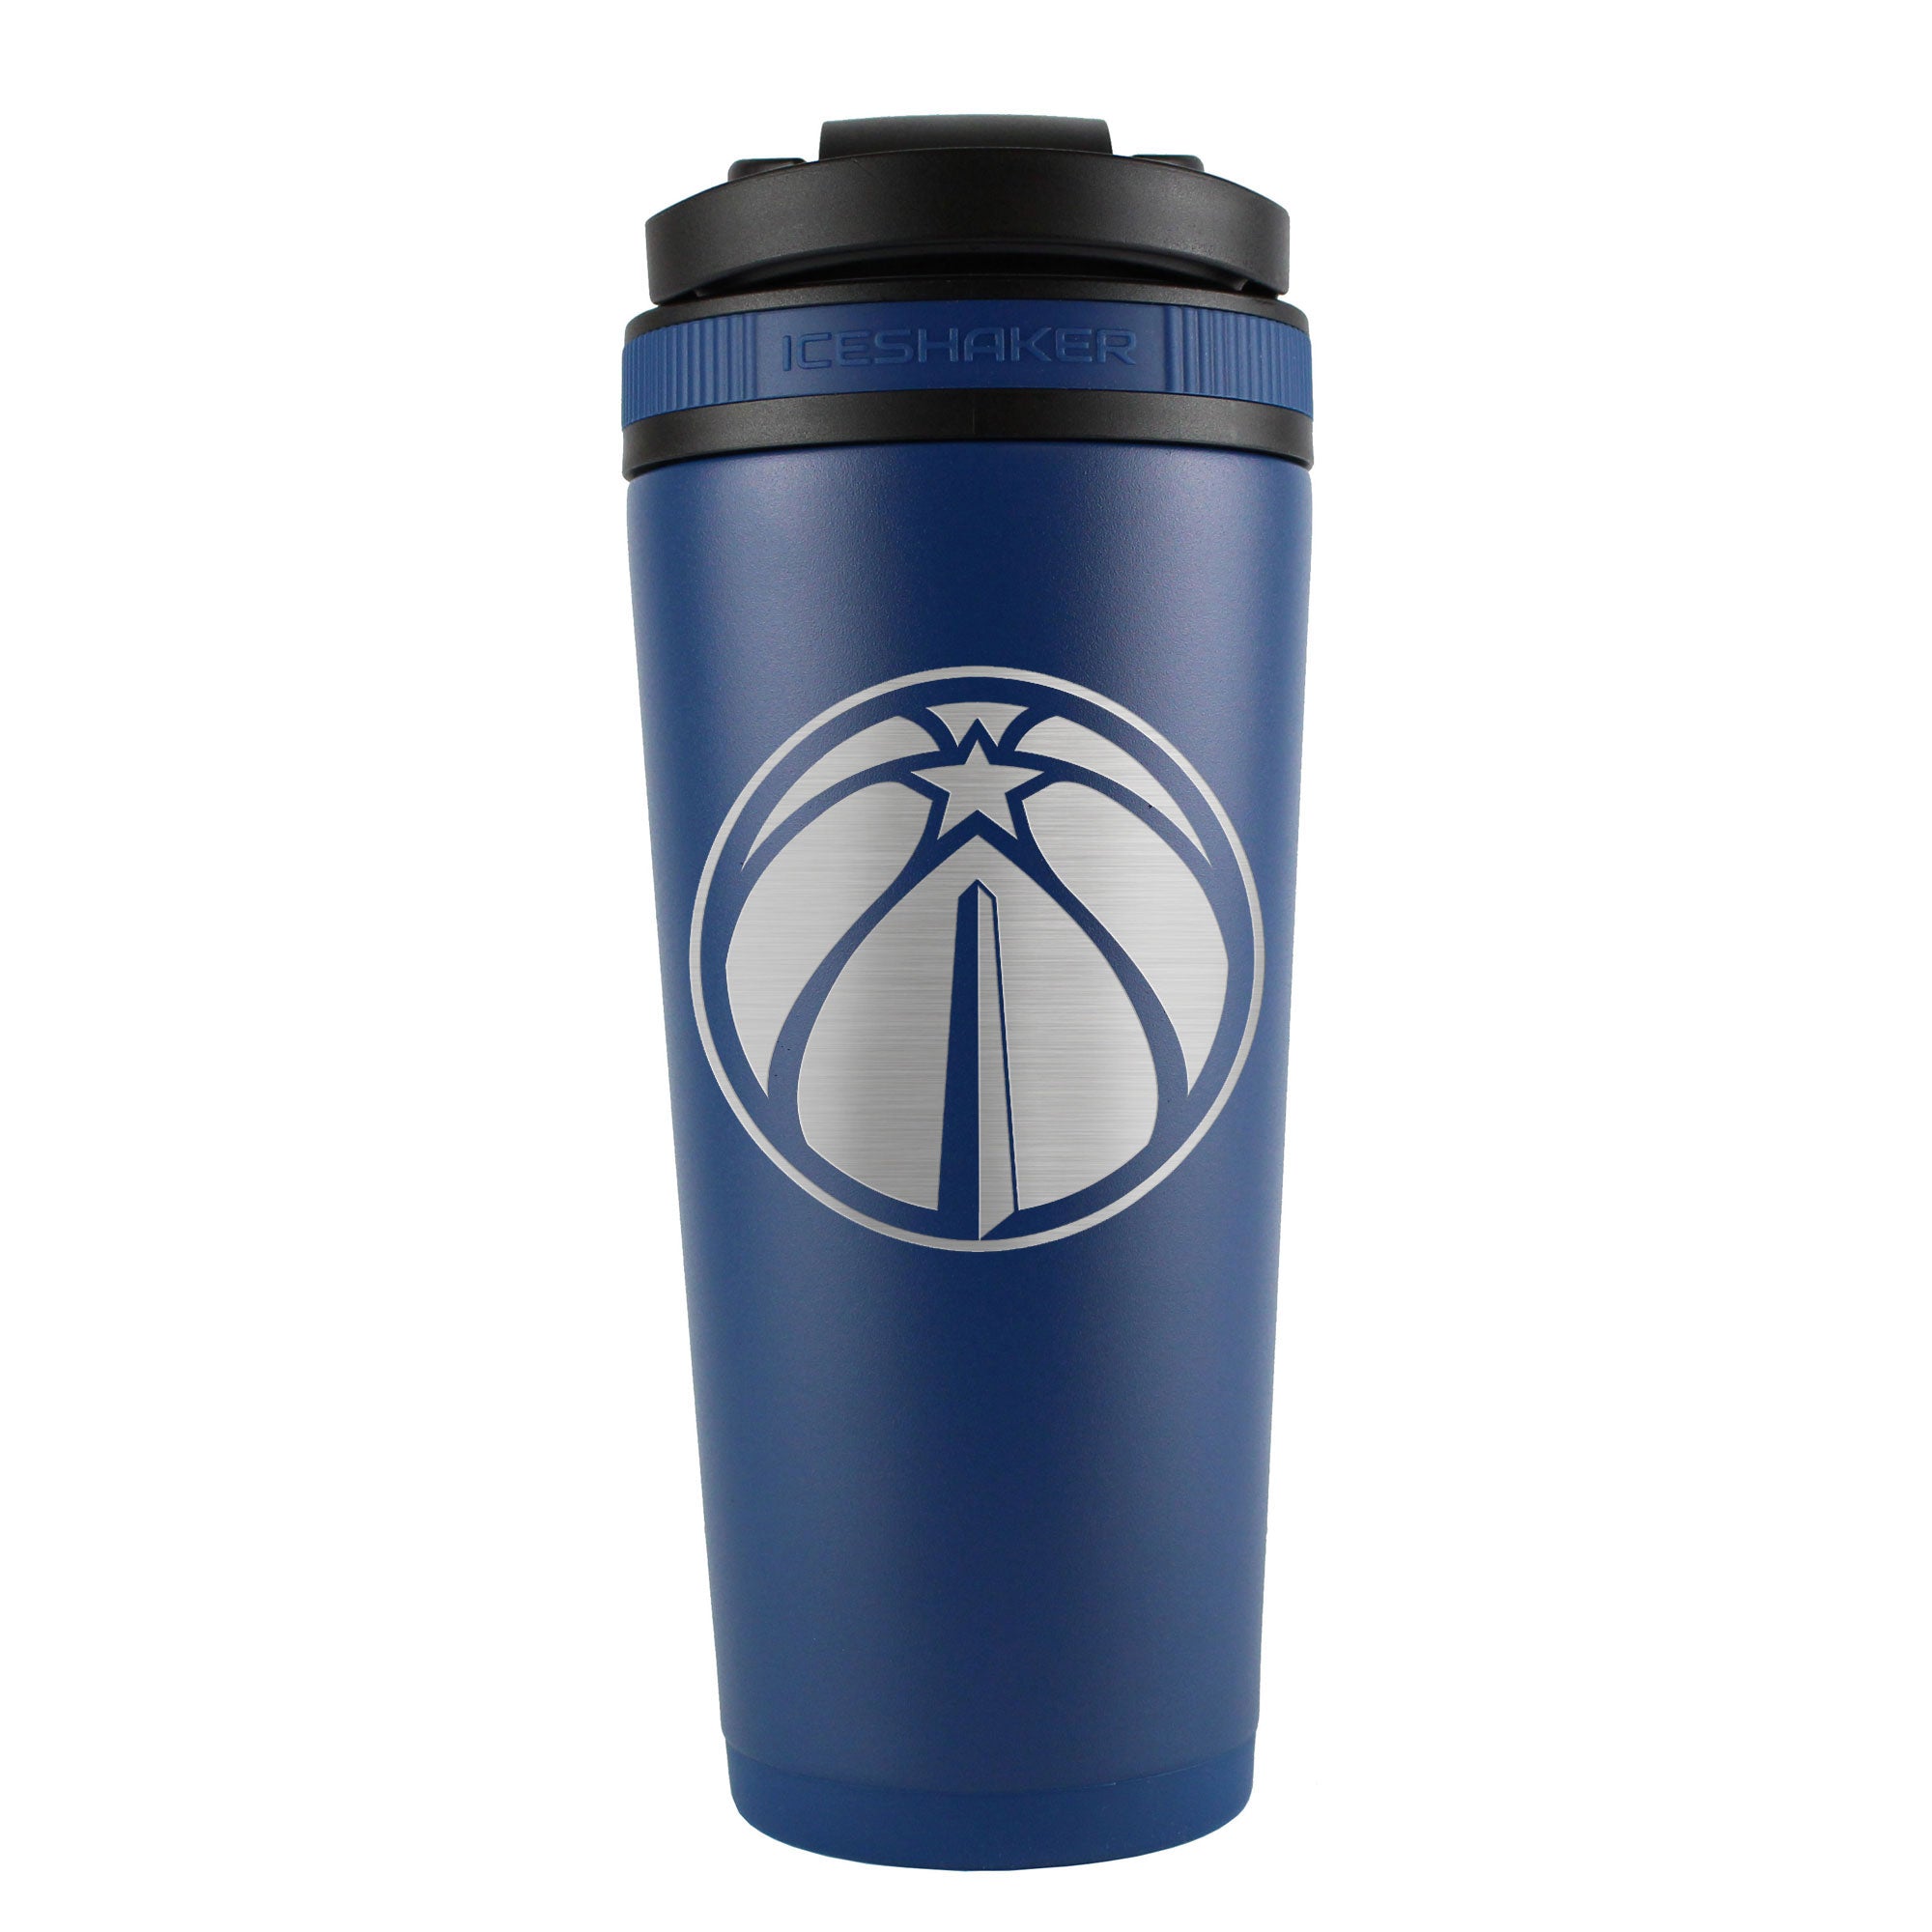 Officially Licensed Washington Wizards 26oz Ice Shaker - Navy